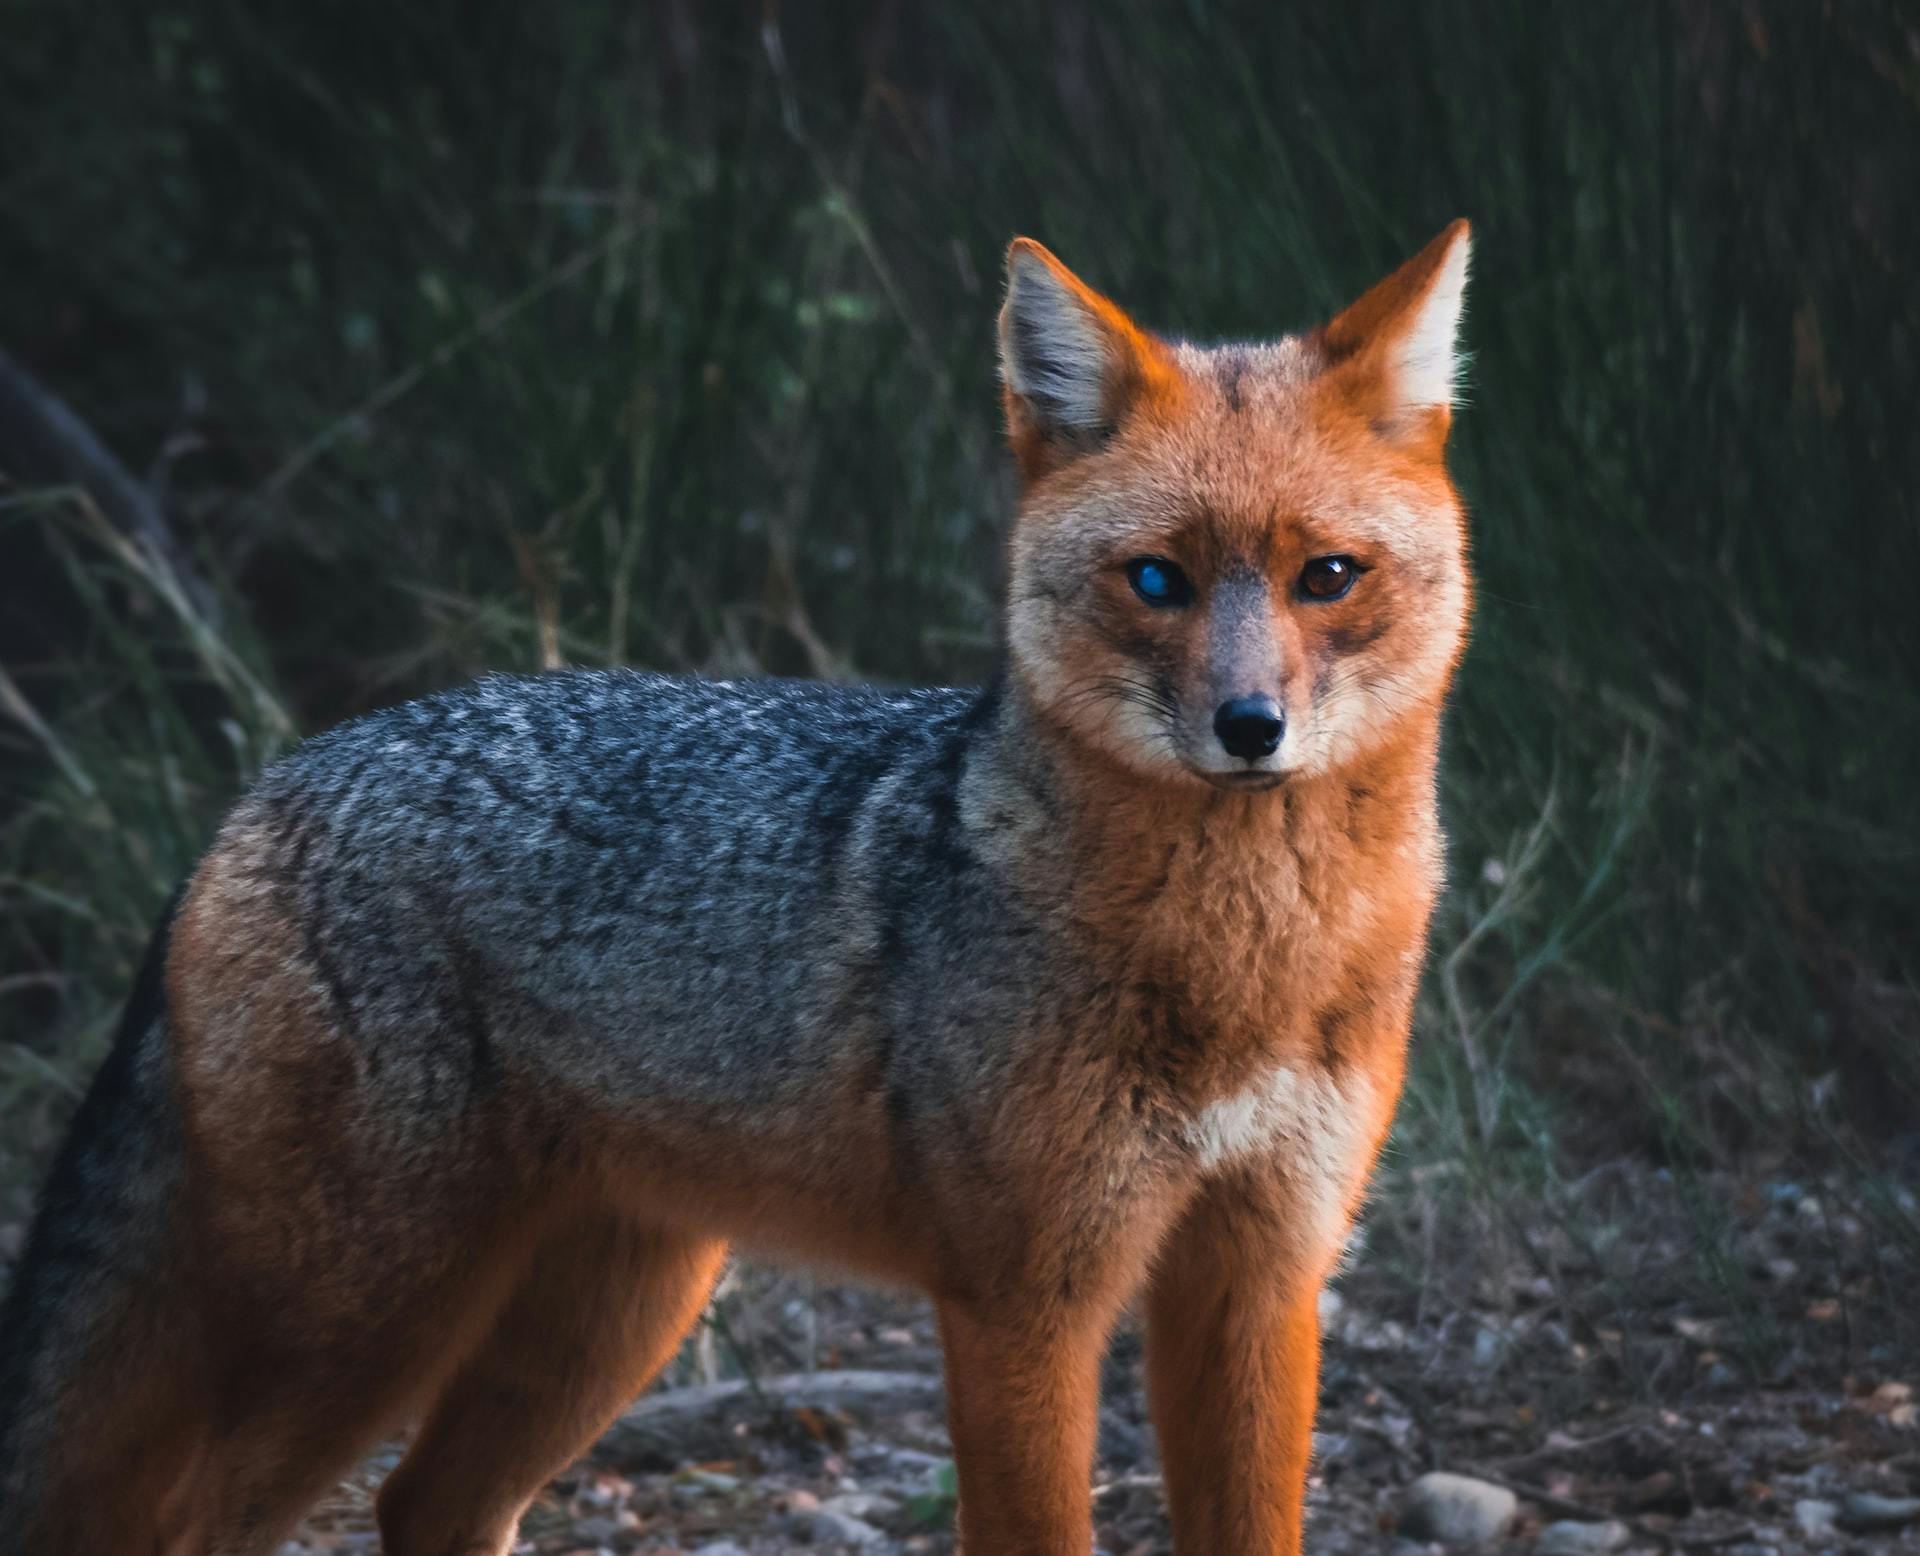 A standing fox staring directly at the camera.